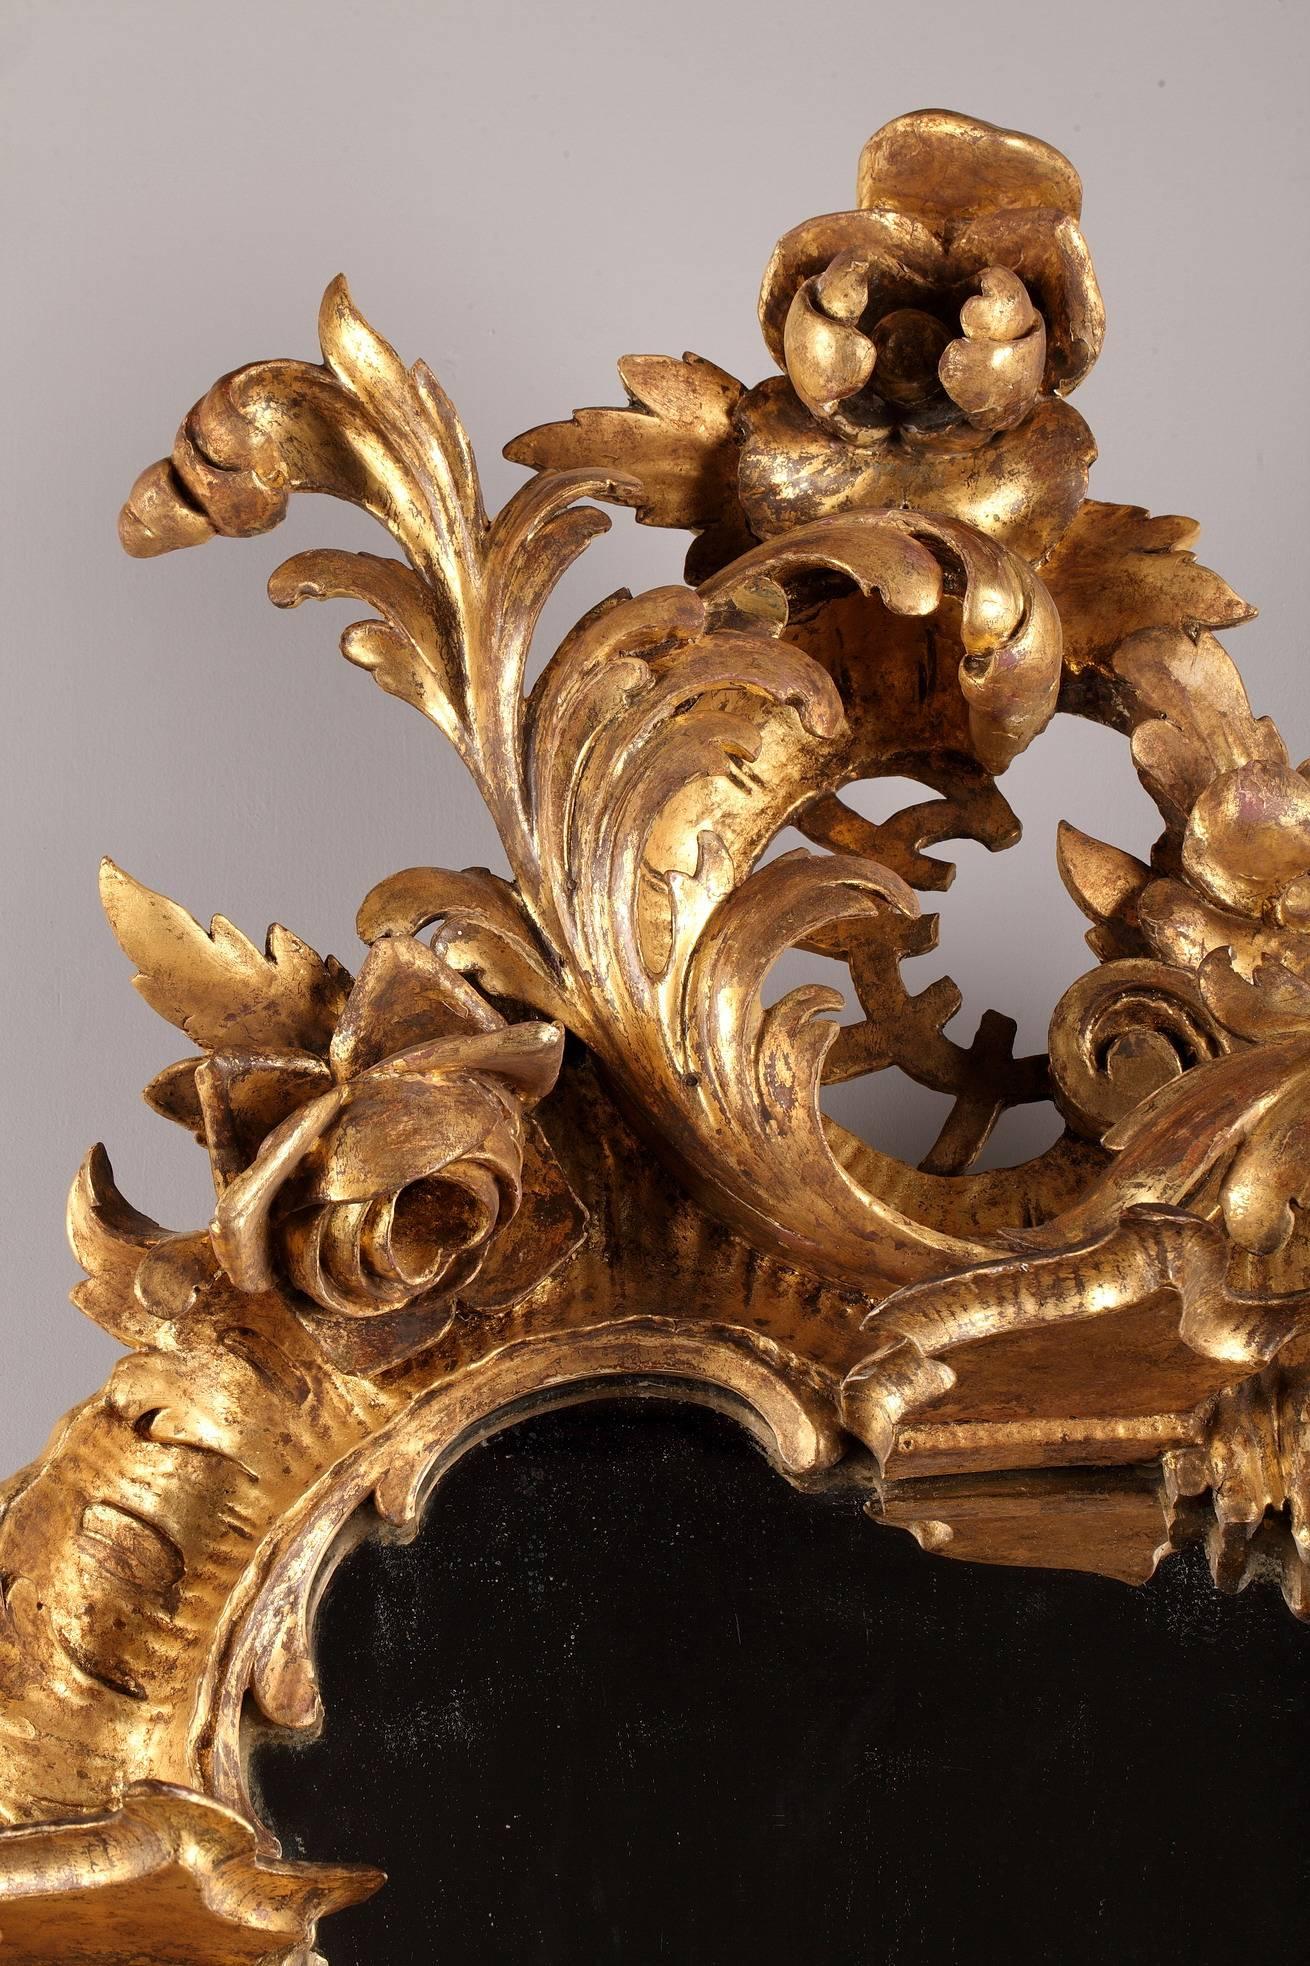 Late 18th century Venetian-style mirror. It is made of giltwood and is richly decorated with scrolls, flowers and foliage in Rococo style. The mirror is provided with four small consoles with curved lines. Italian work. Good vintage